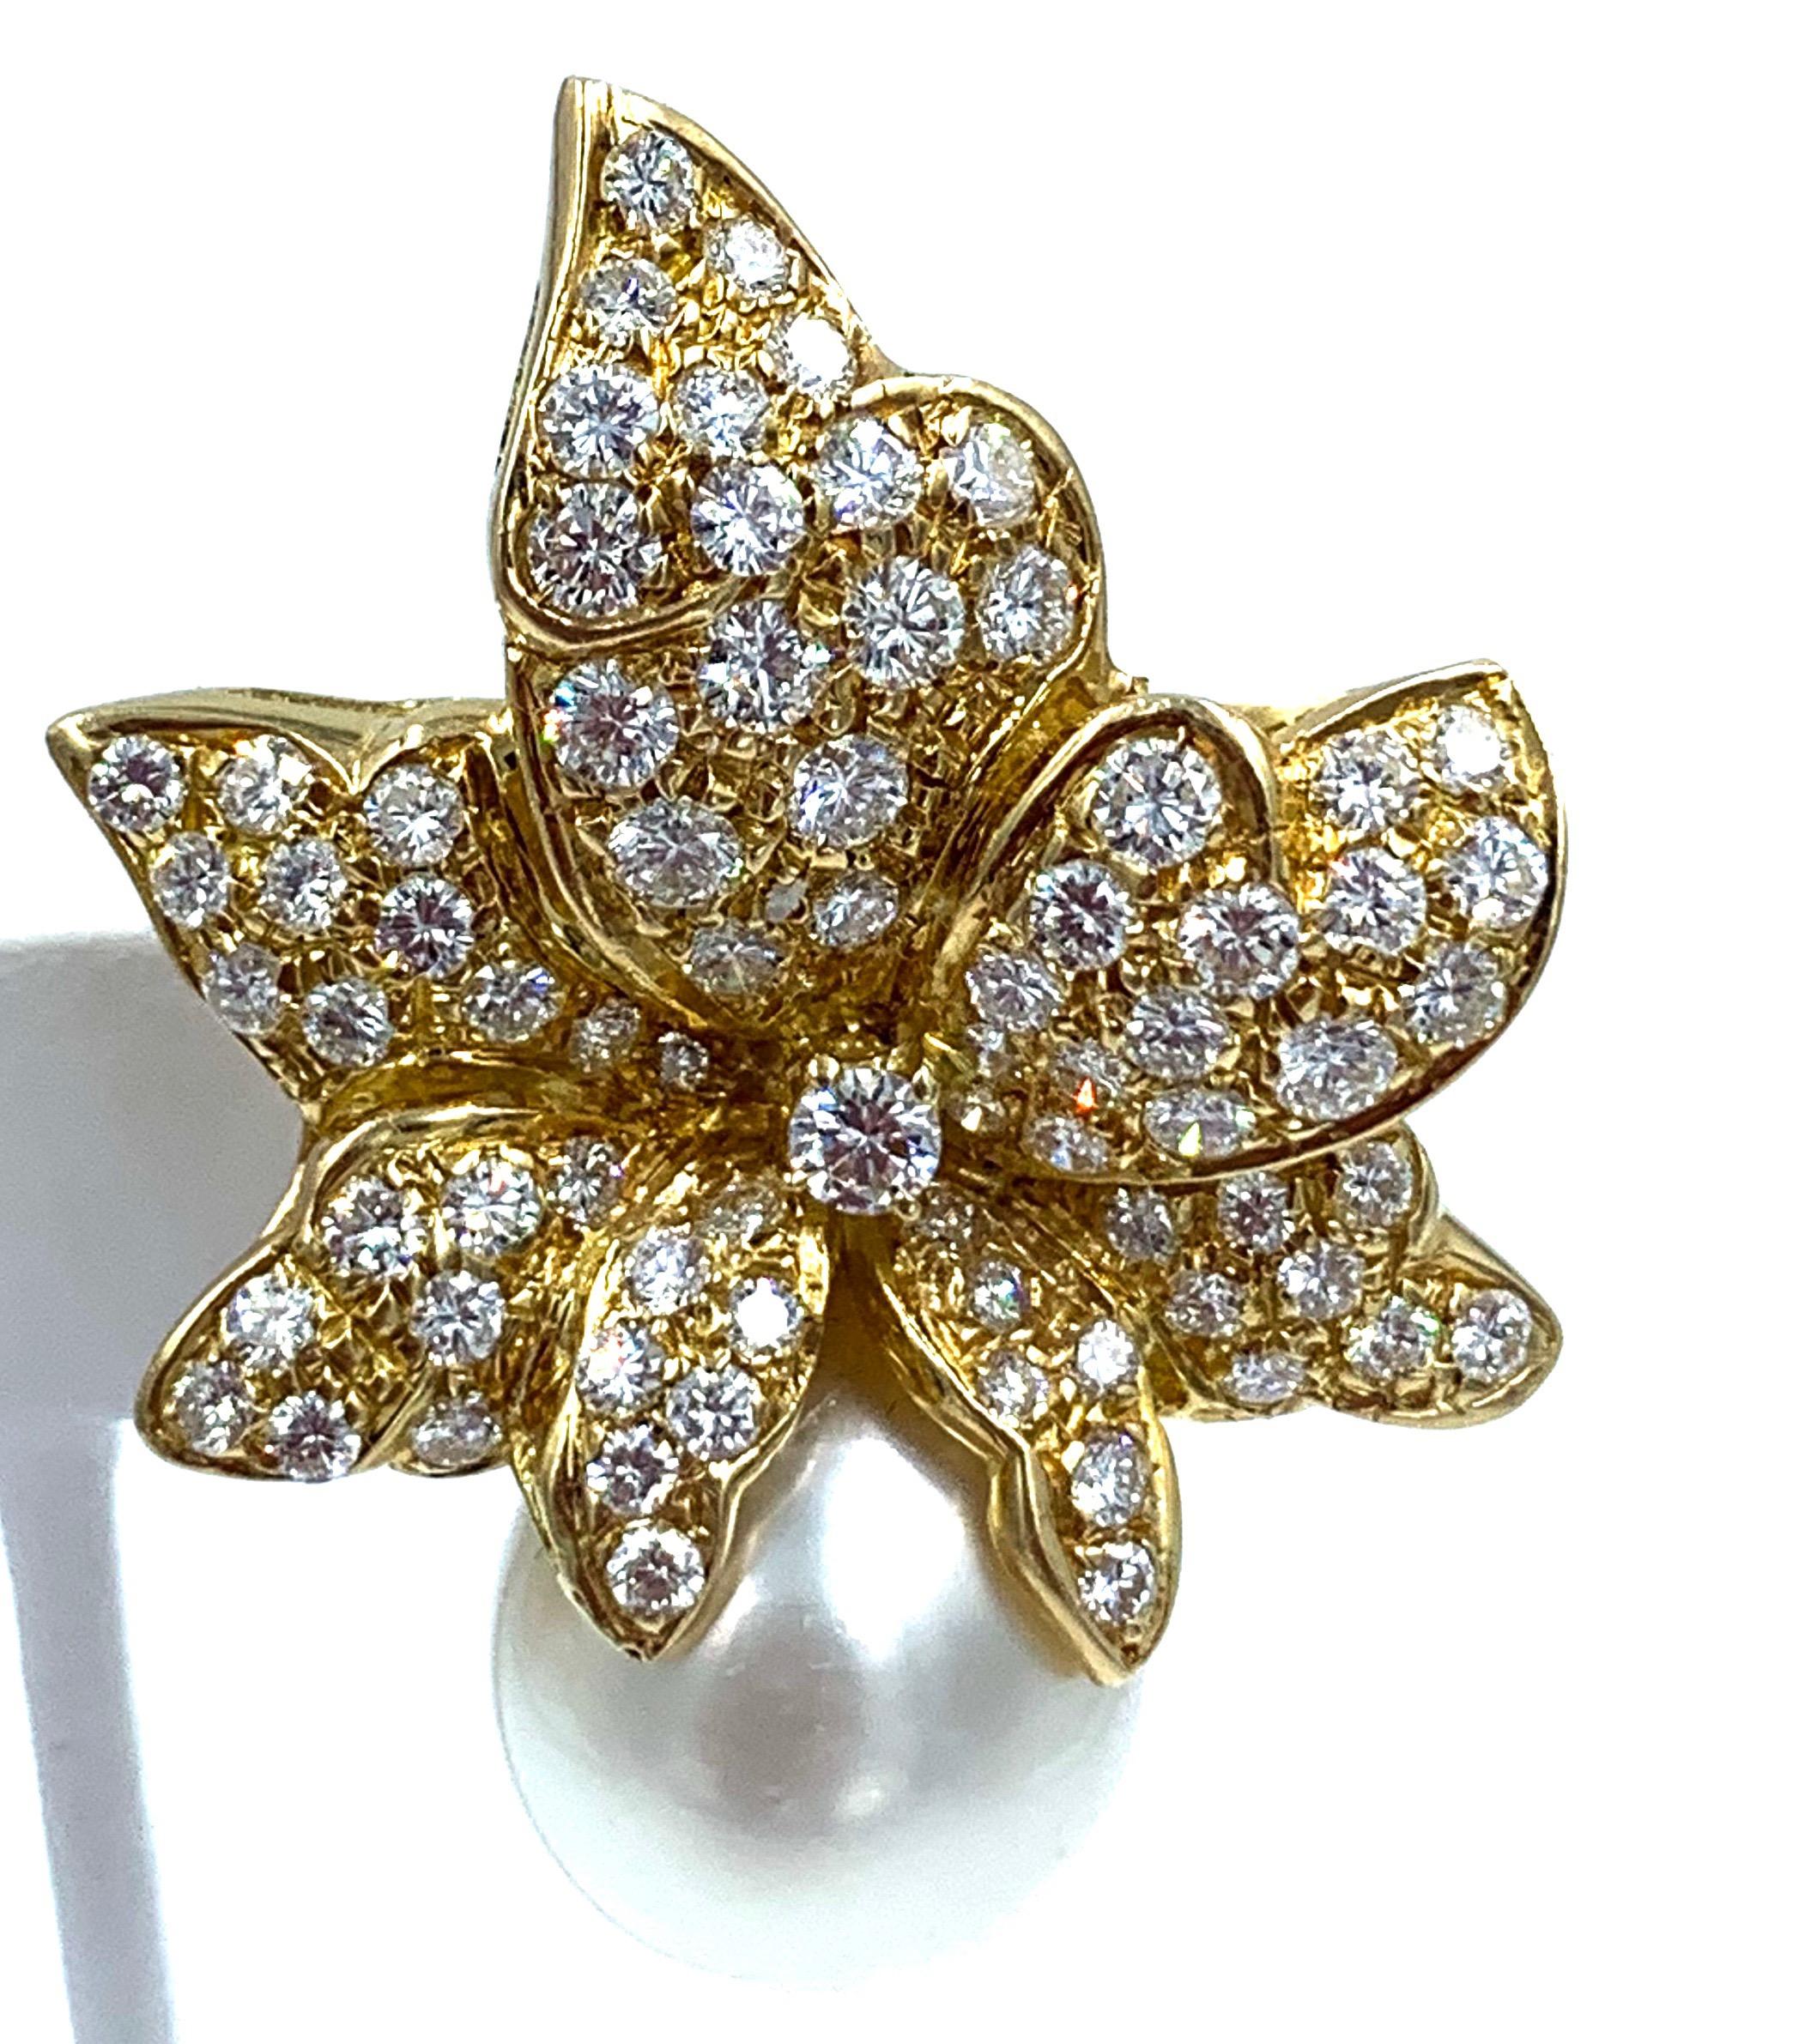 18 Karat Gold and Diamond Flower Shaped Earrings with Huge South Sea Pearl For Sale 1